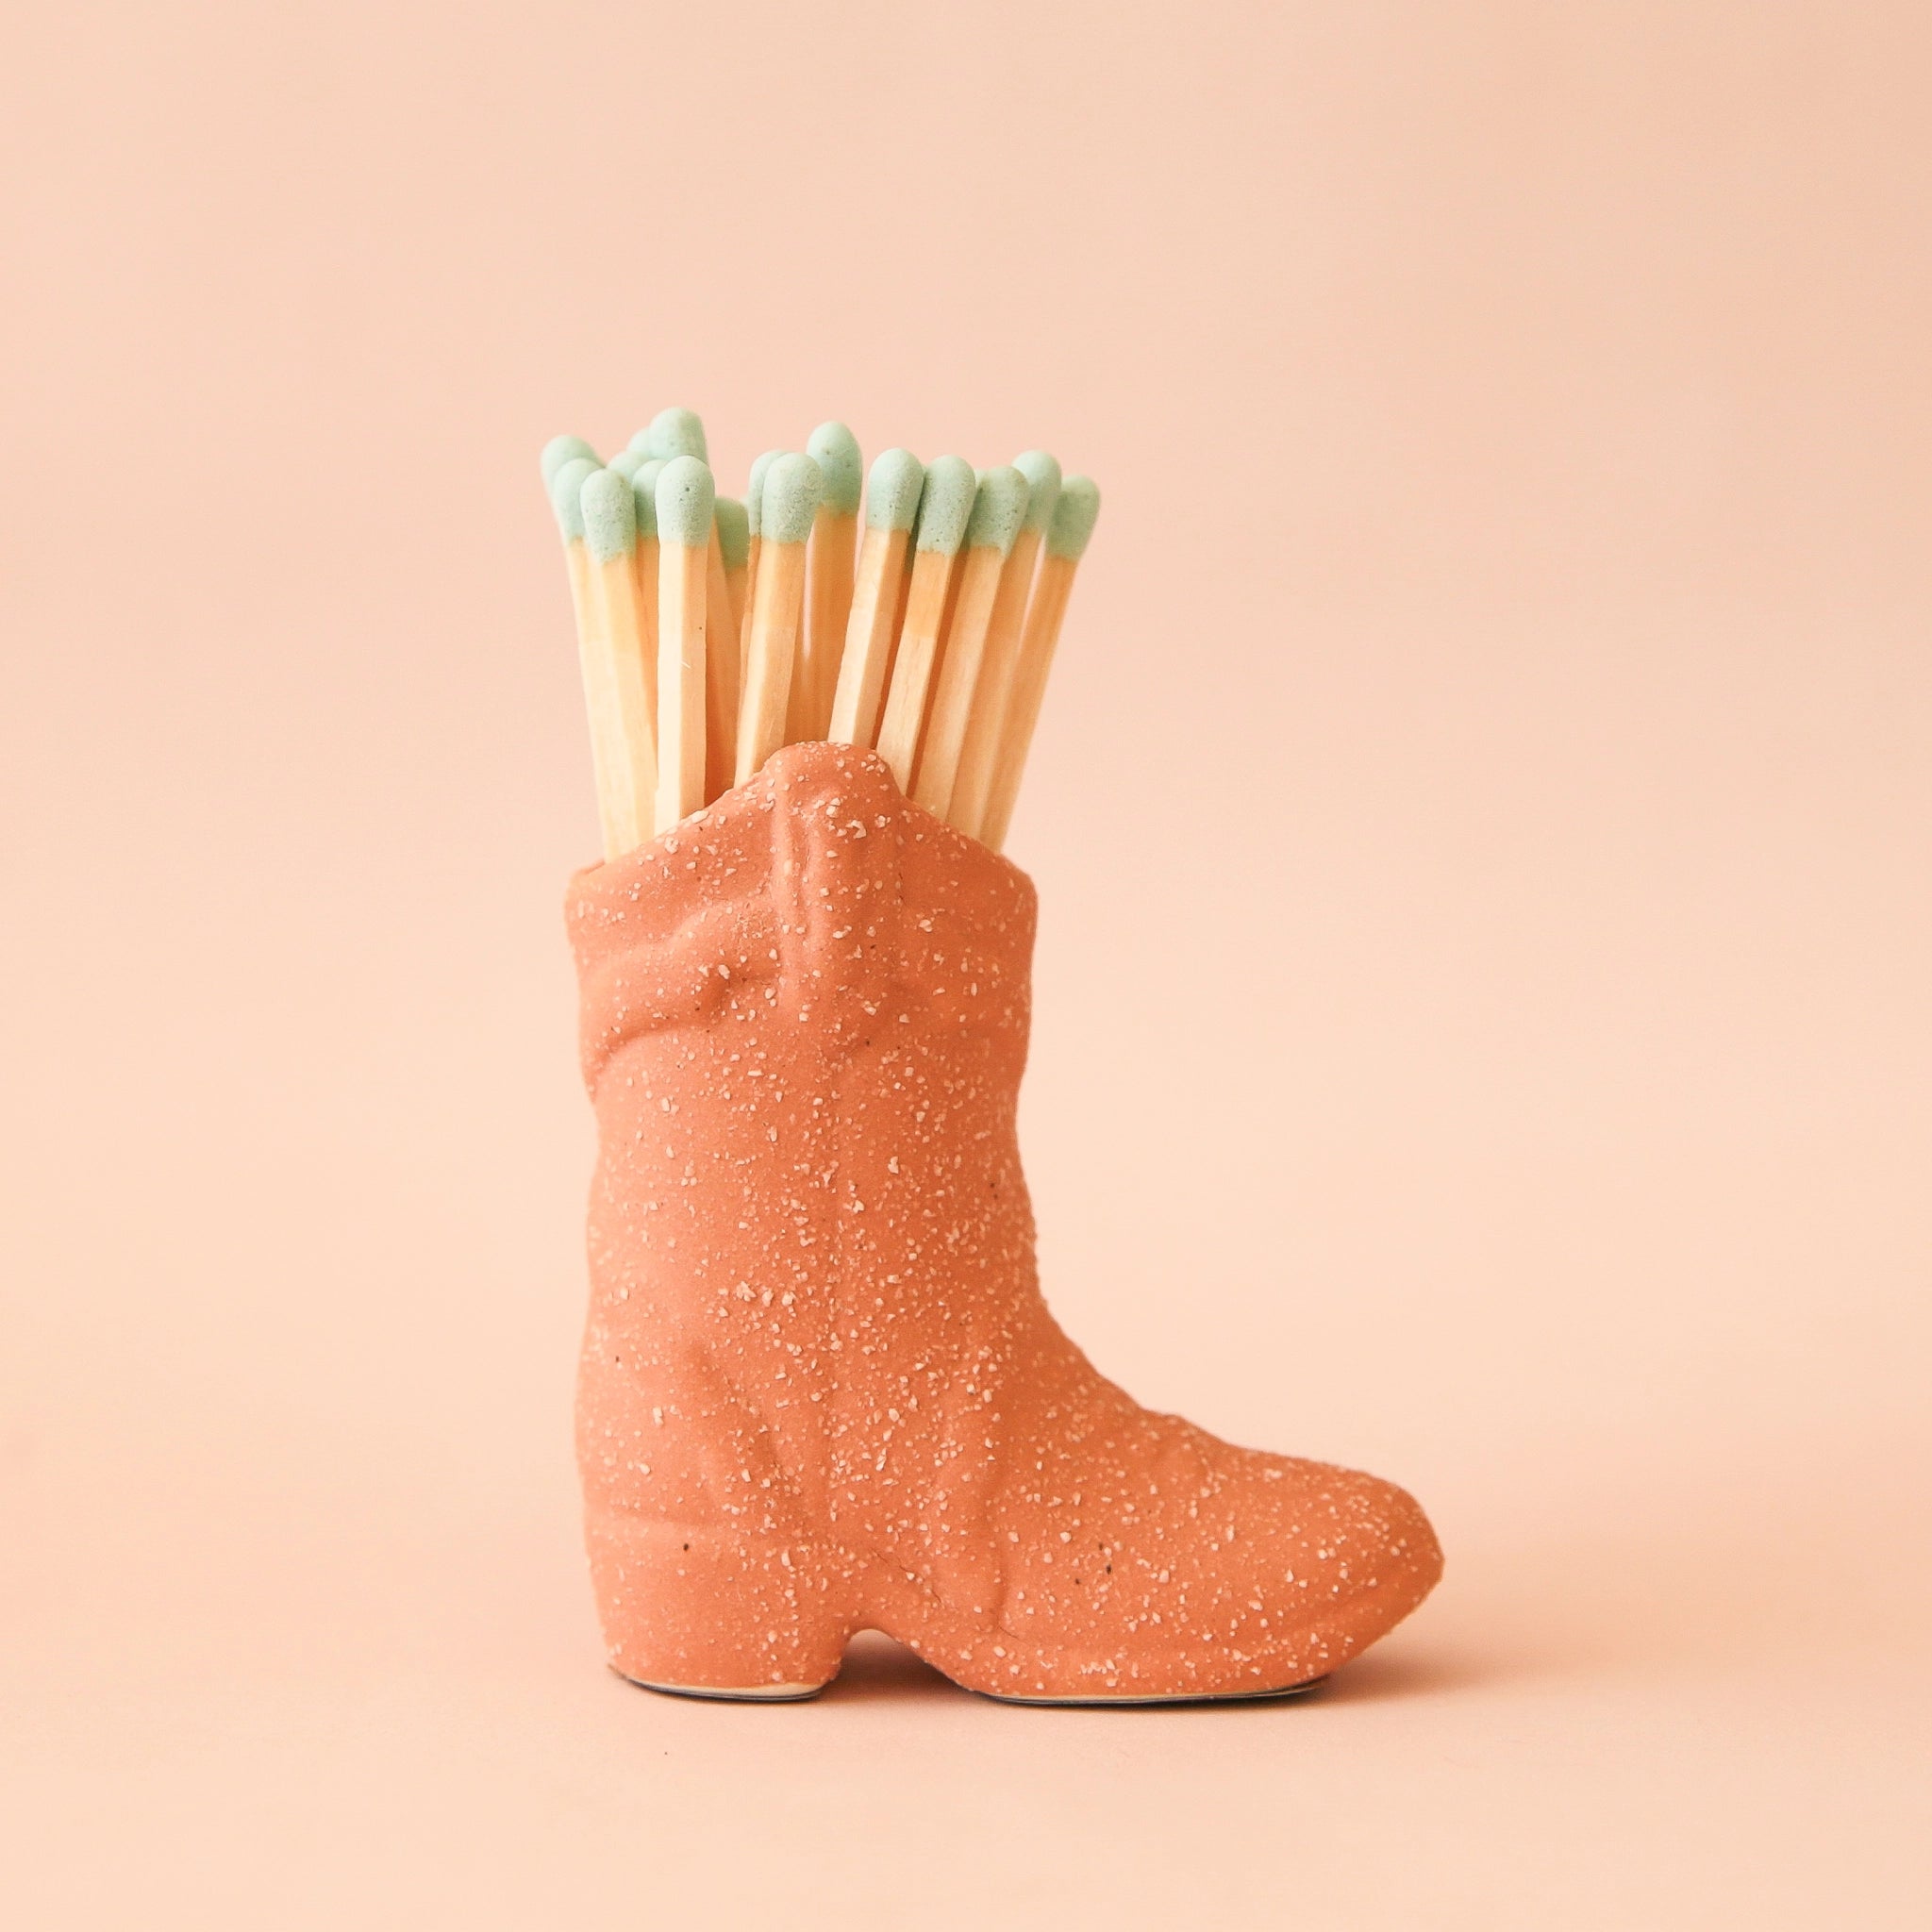 Terracotta ceramic boot match holder filled with a bundle of blue dipped matches.